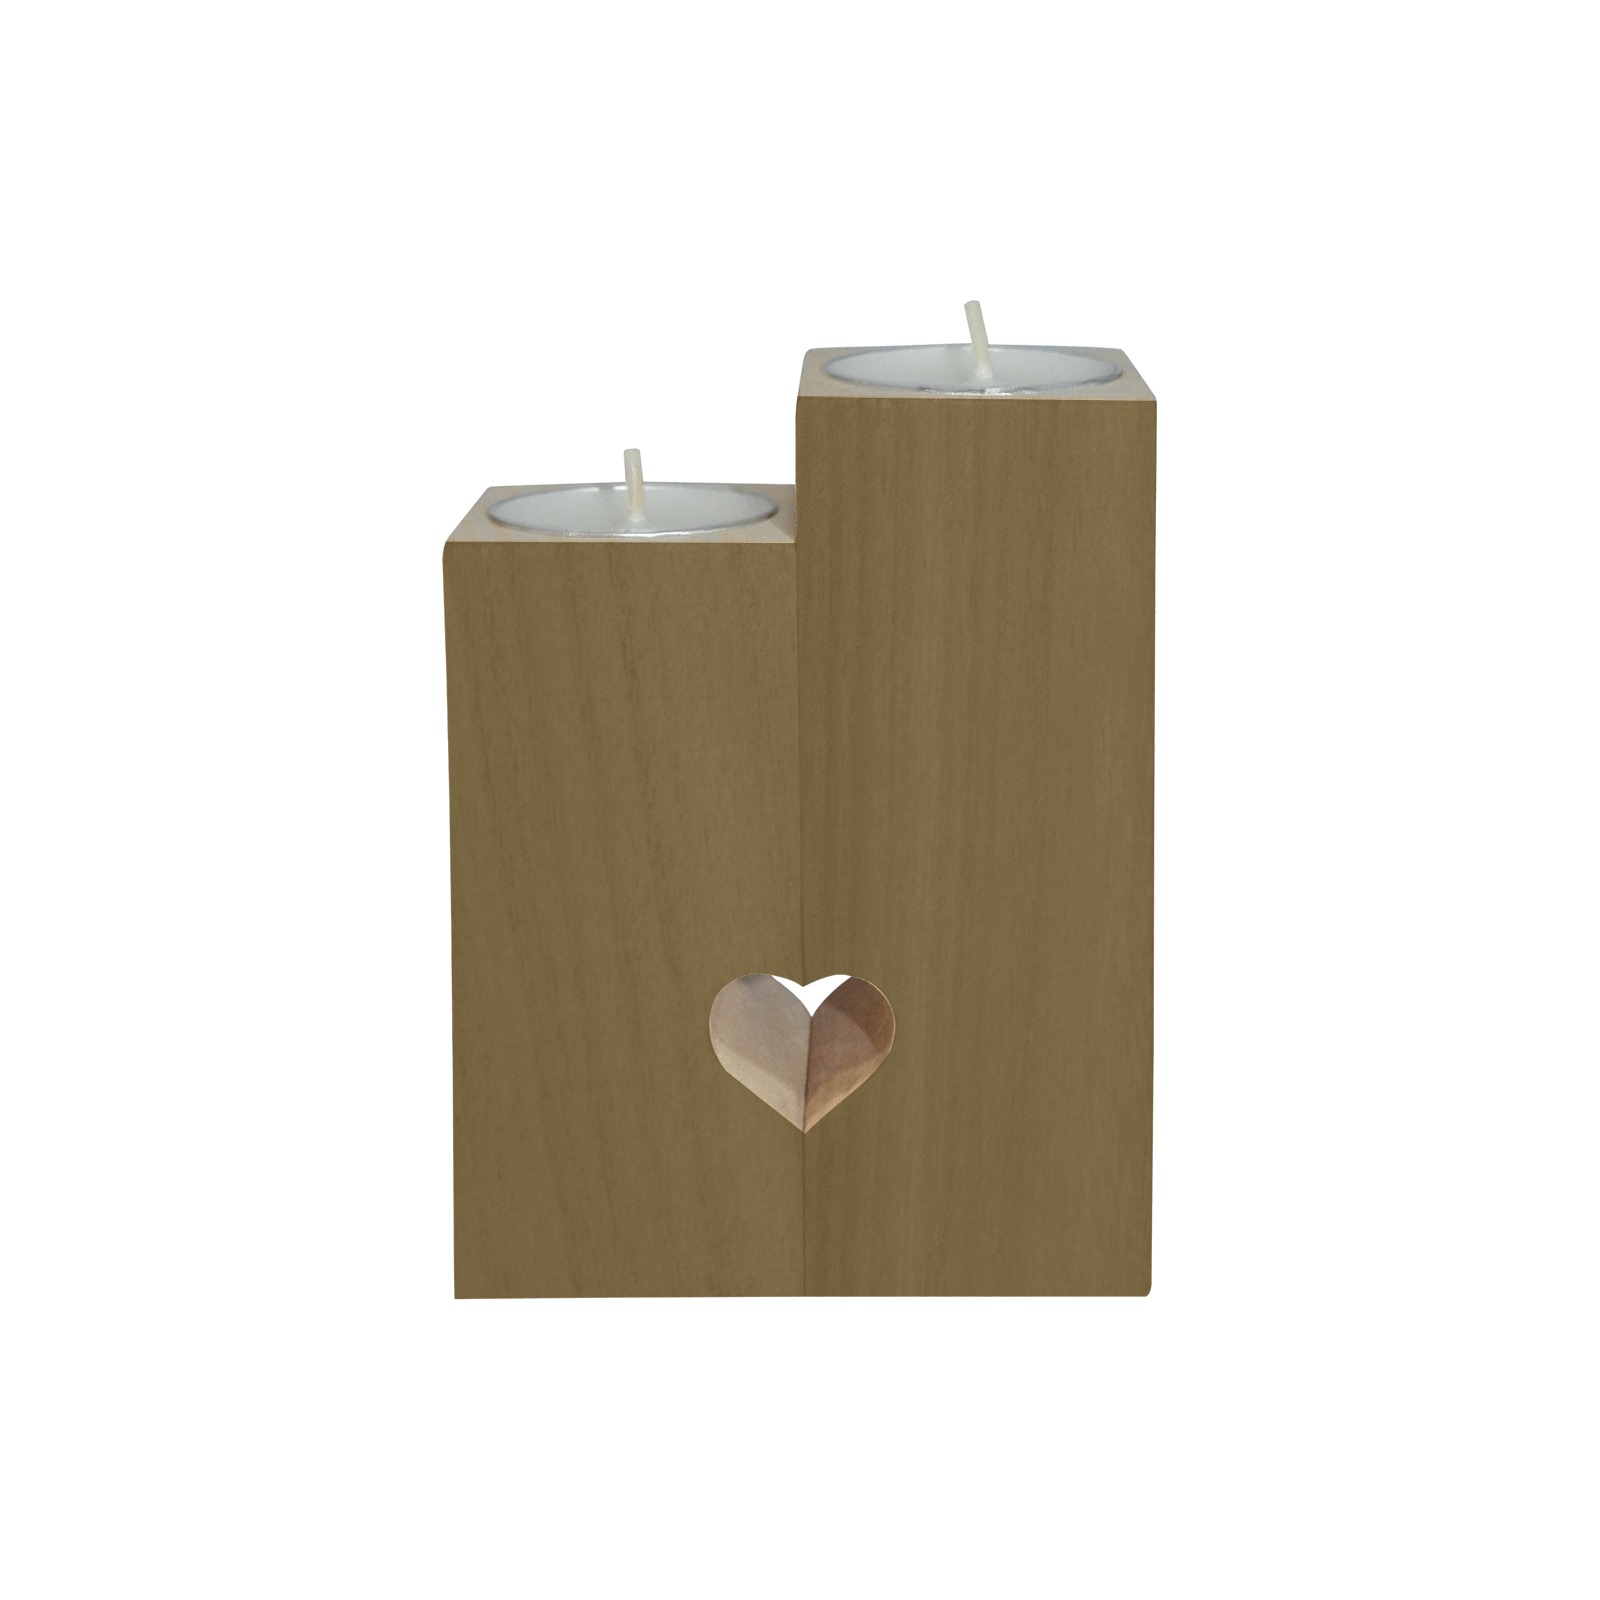 Early Sunset Collection Wooden Candle Holder (Without Candle)